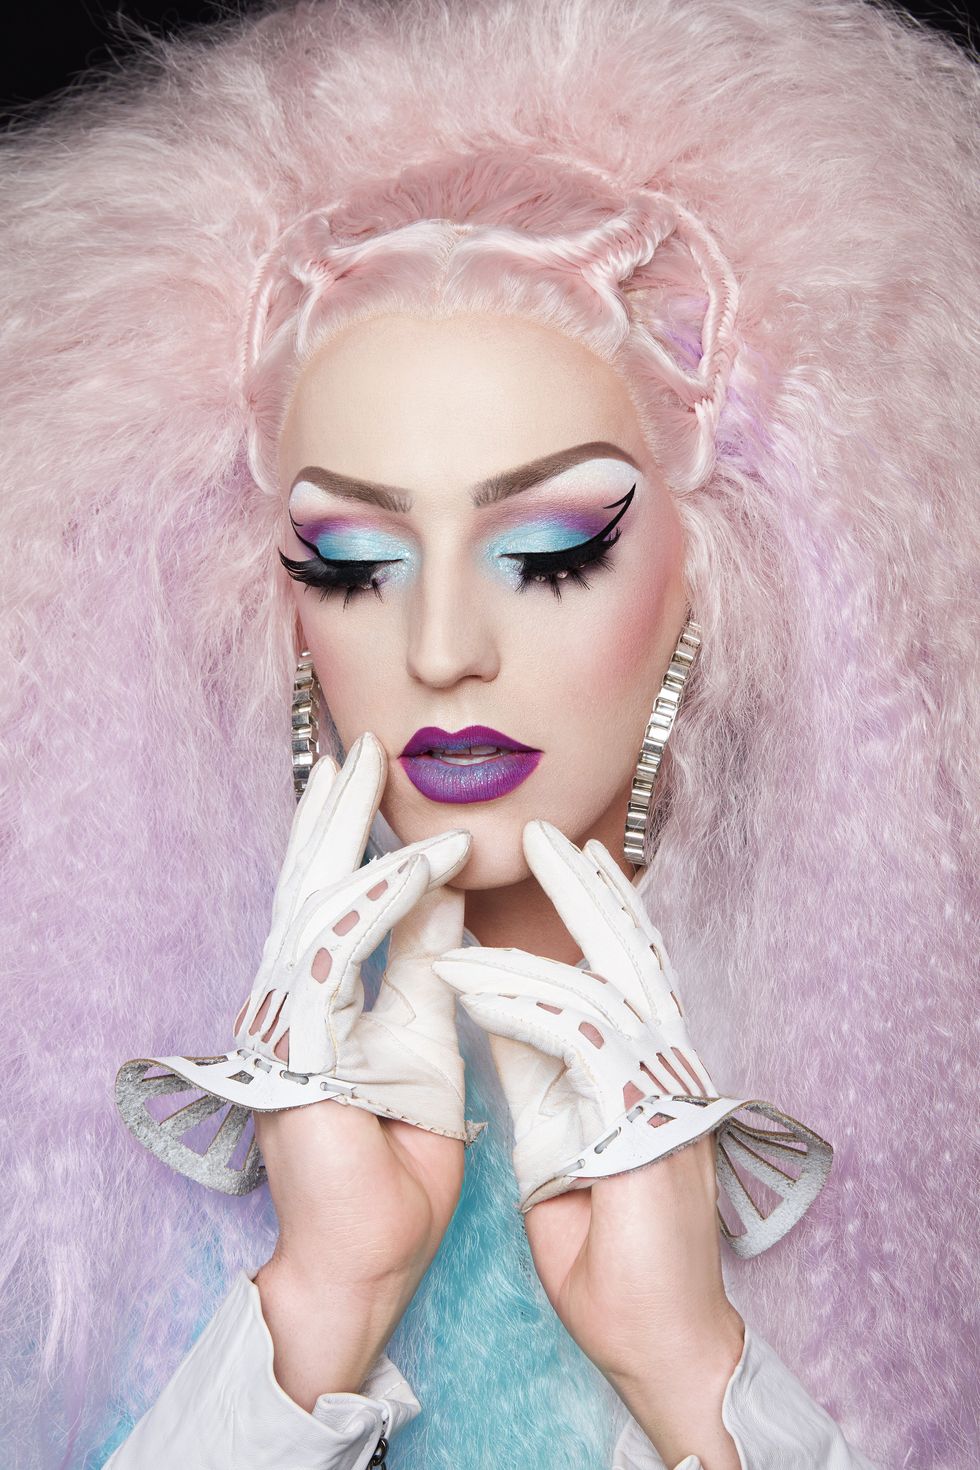 50 Sickening Portraits of Your Favorite Queens at DragCon - PAPER Magazine